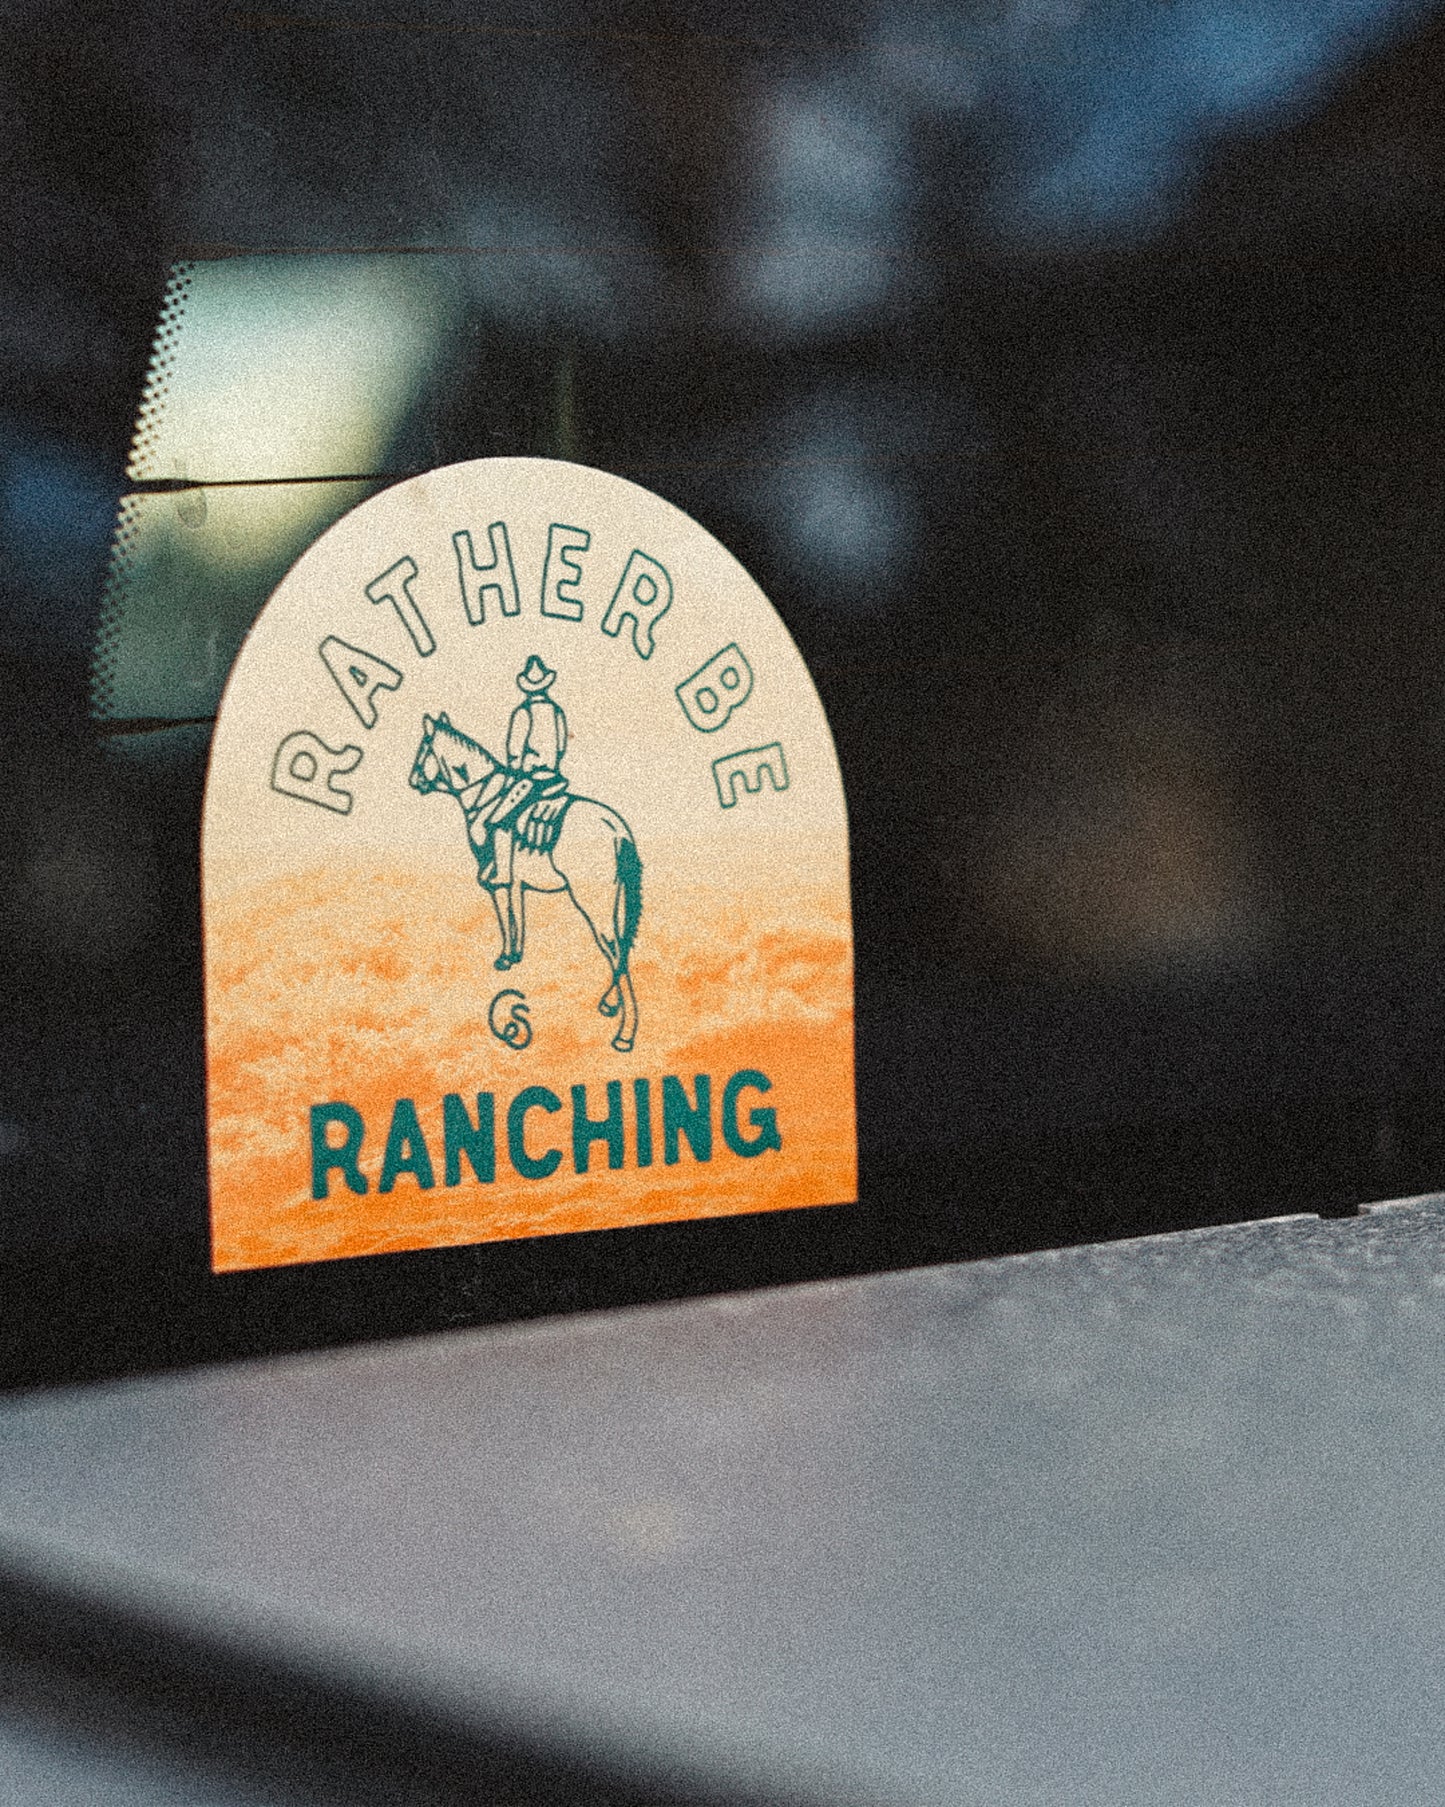 RATHER BE RANCHING Sticker